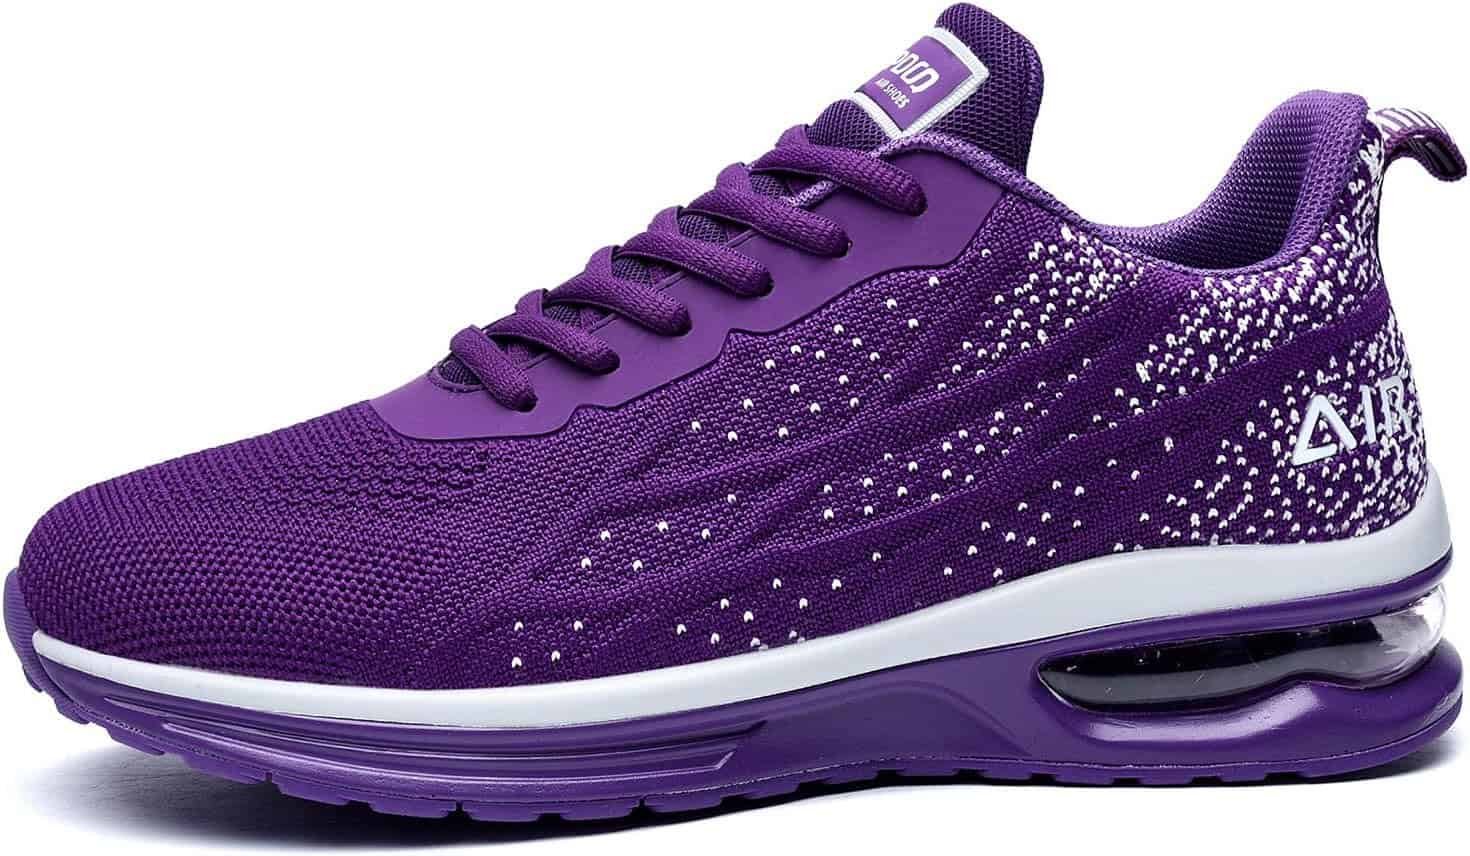 GANNOU Womens Air Athletic Running Shoes Fashion Sport Gym Jogging Tennis Fitness Sneaker US5.5-11